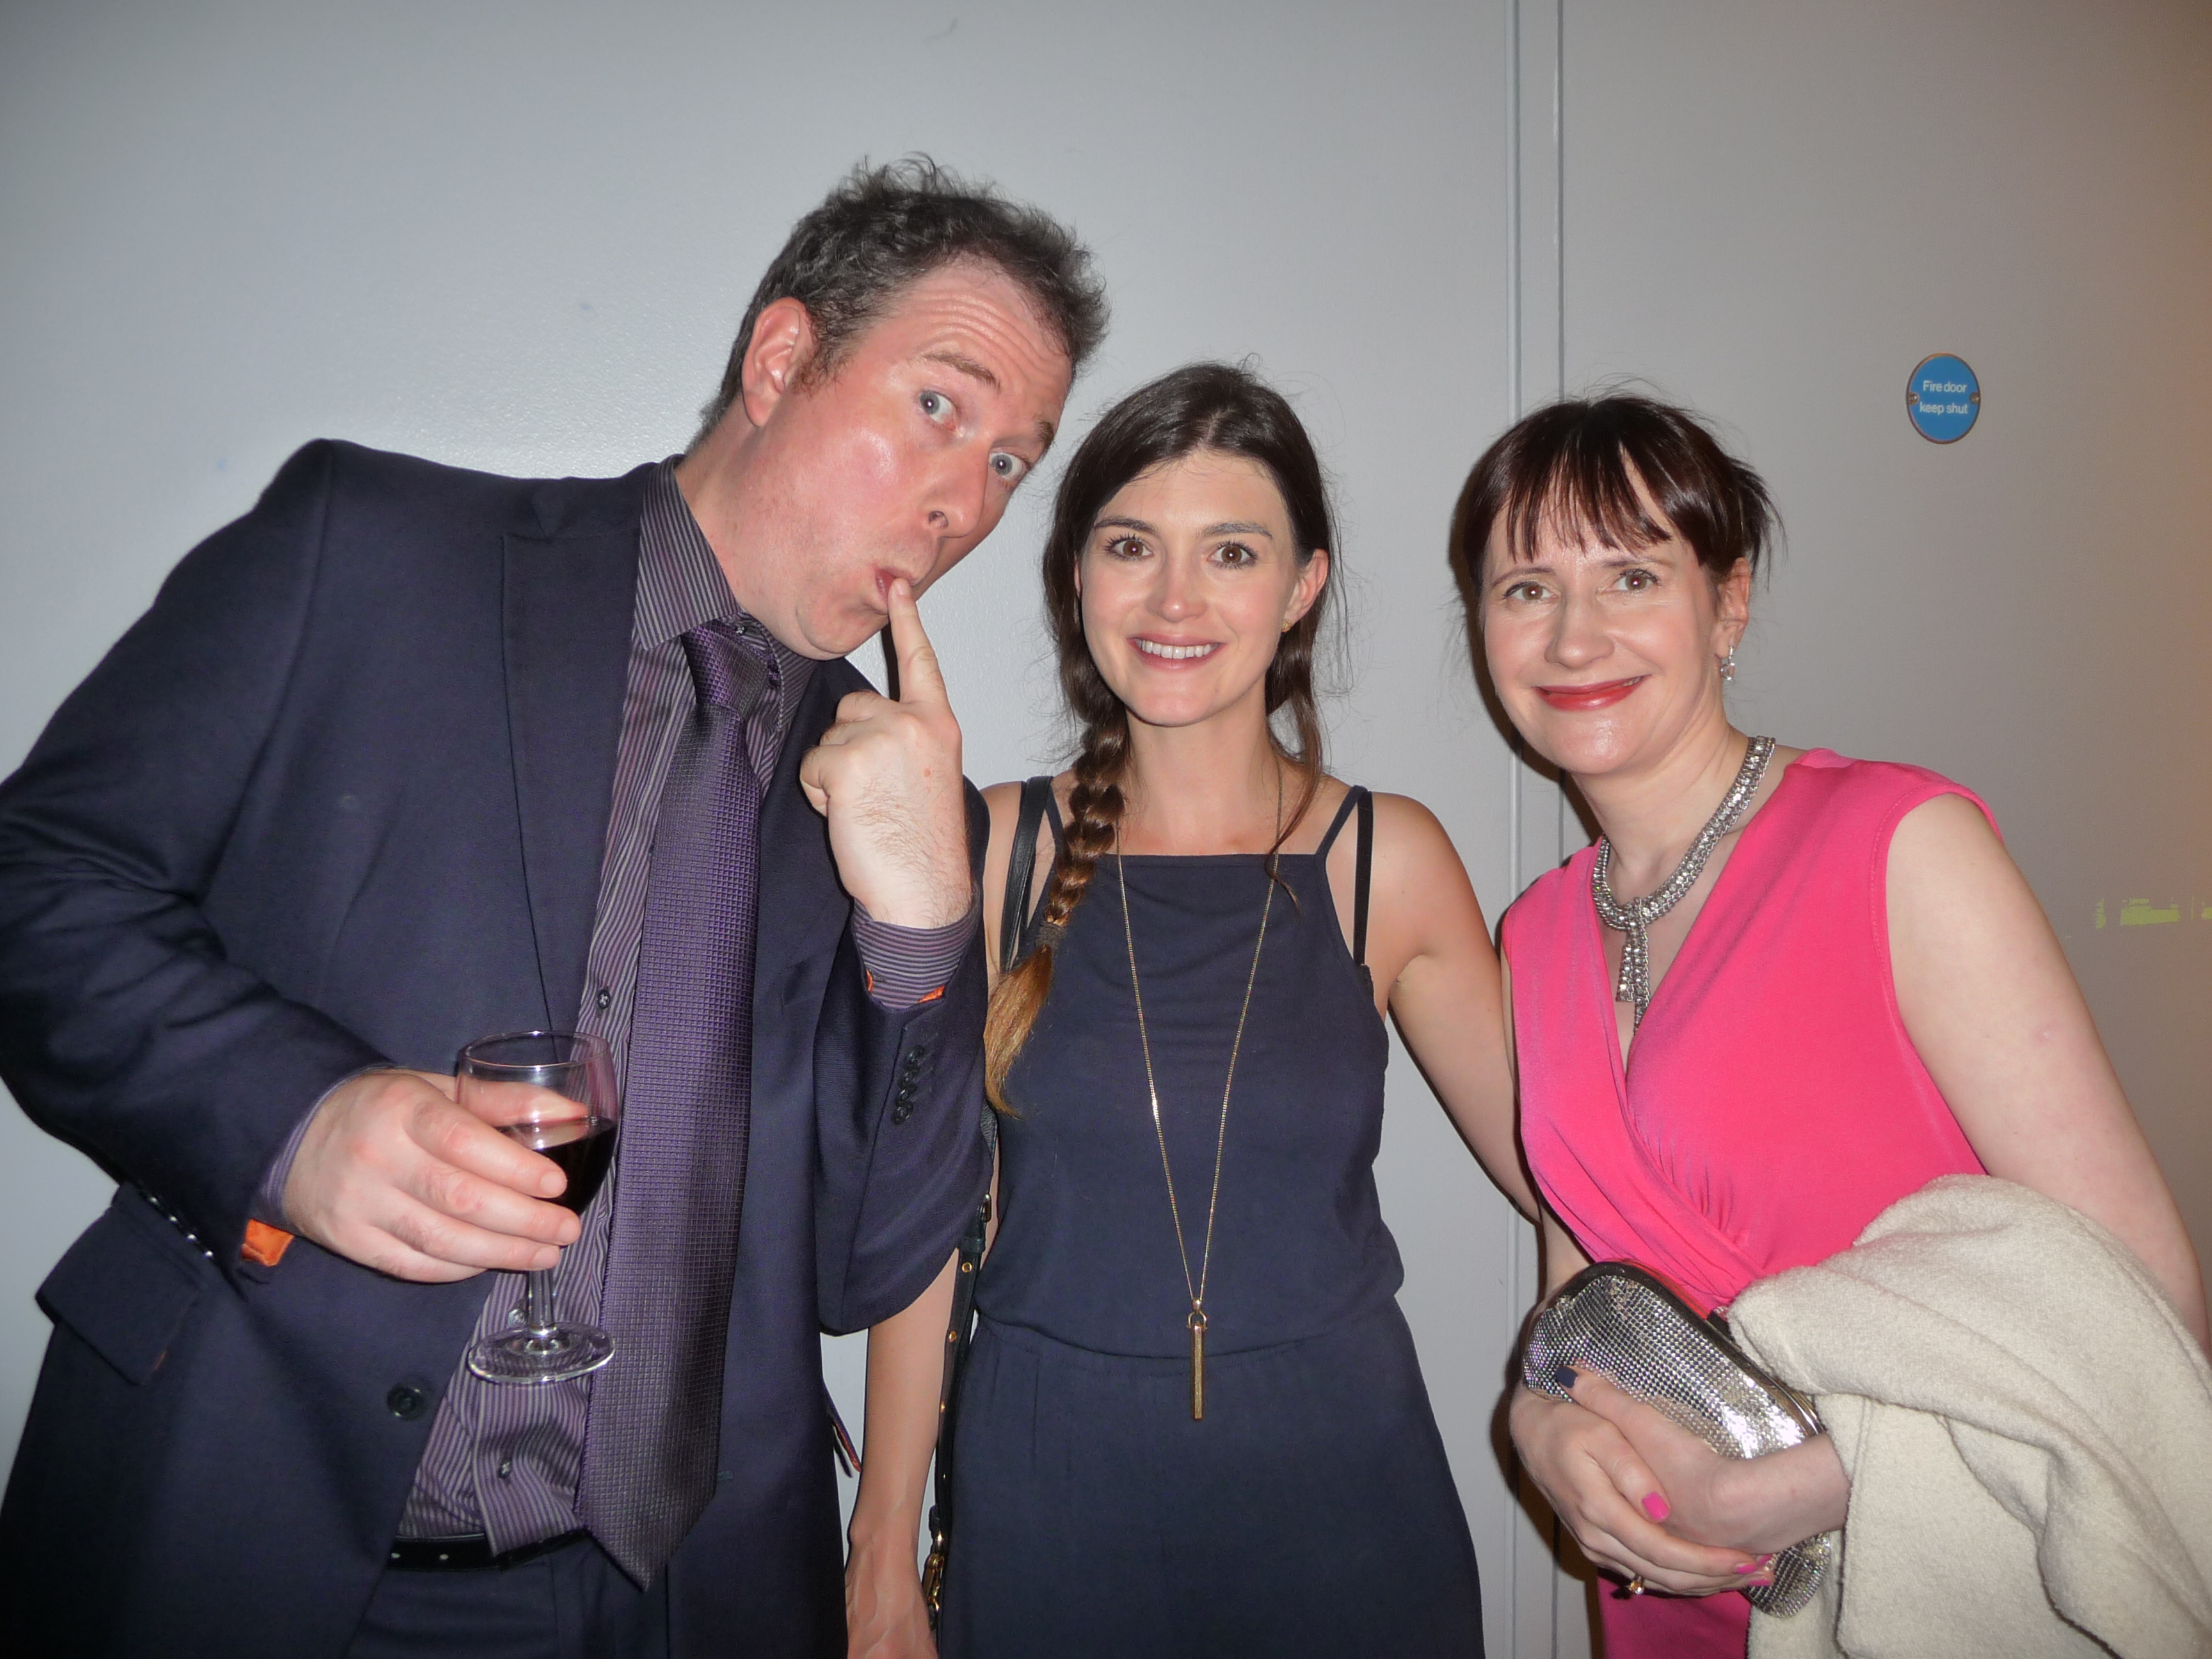 With Dan March and Claire Garvey at the official screening of 'Downsizer' at MPC Wardour Street.